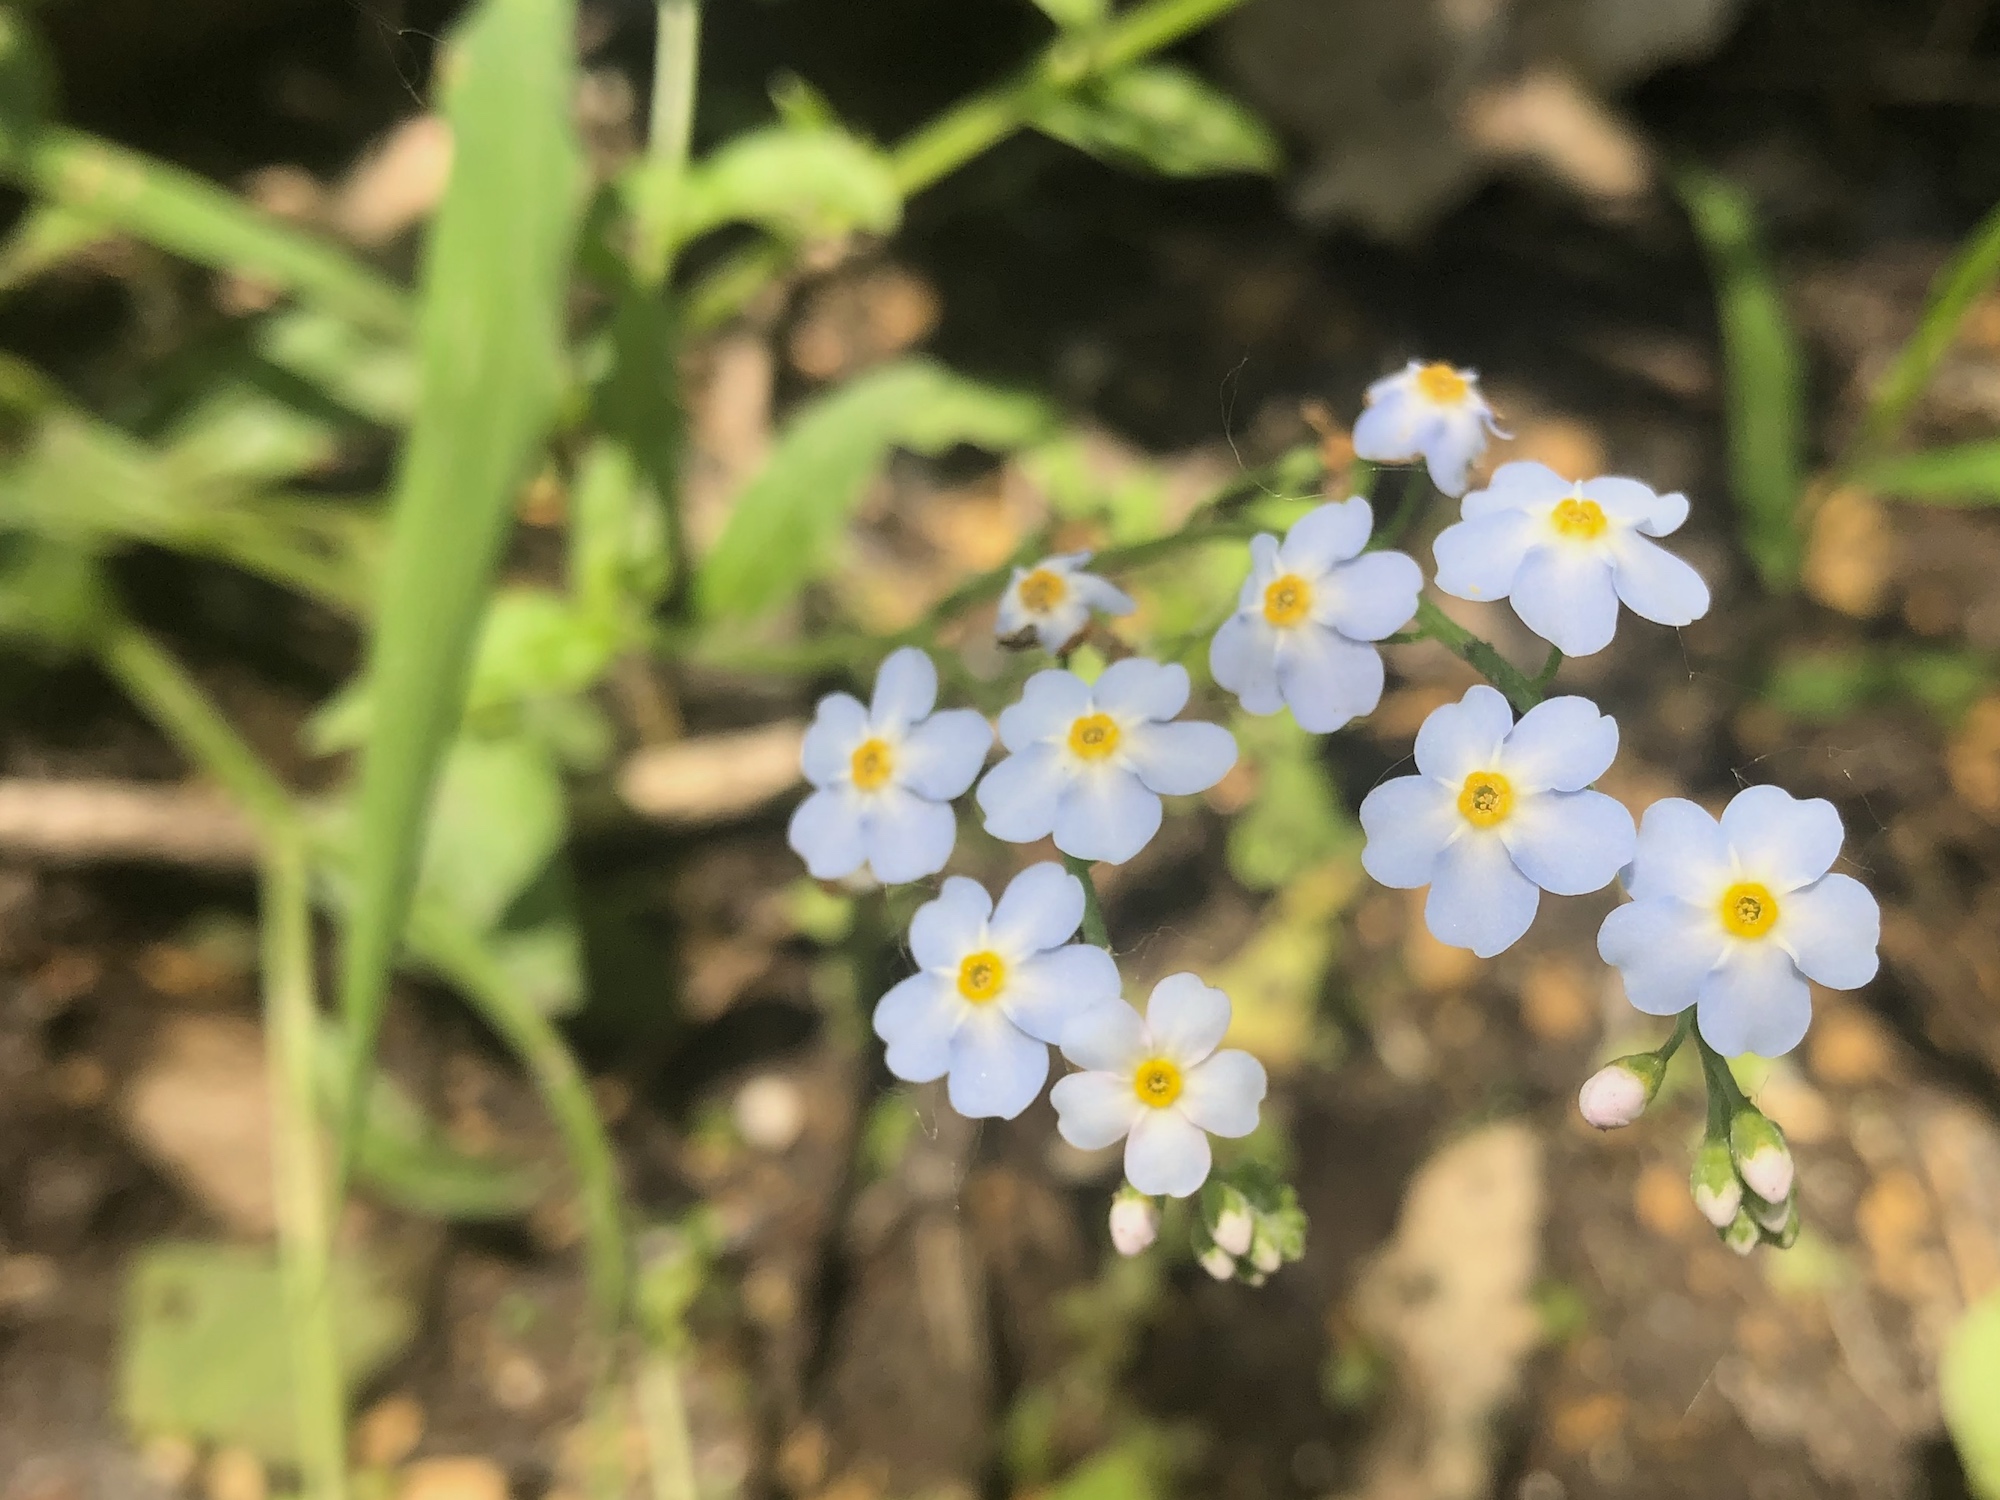 True Forget-me-not in Ho-Nee-Un Pond in Madison, Wisconsin on June 2, 2021.